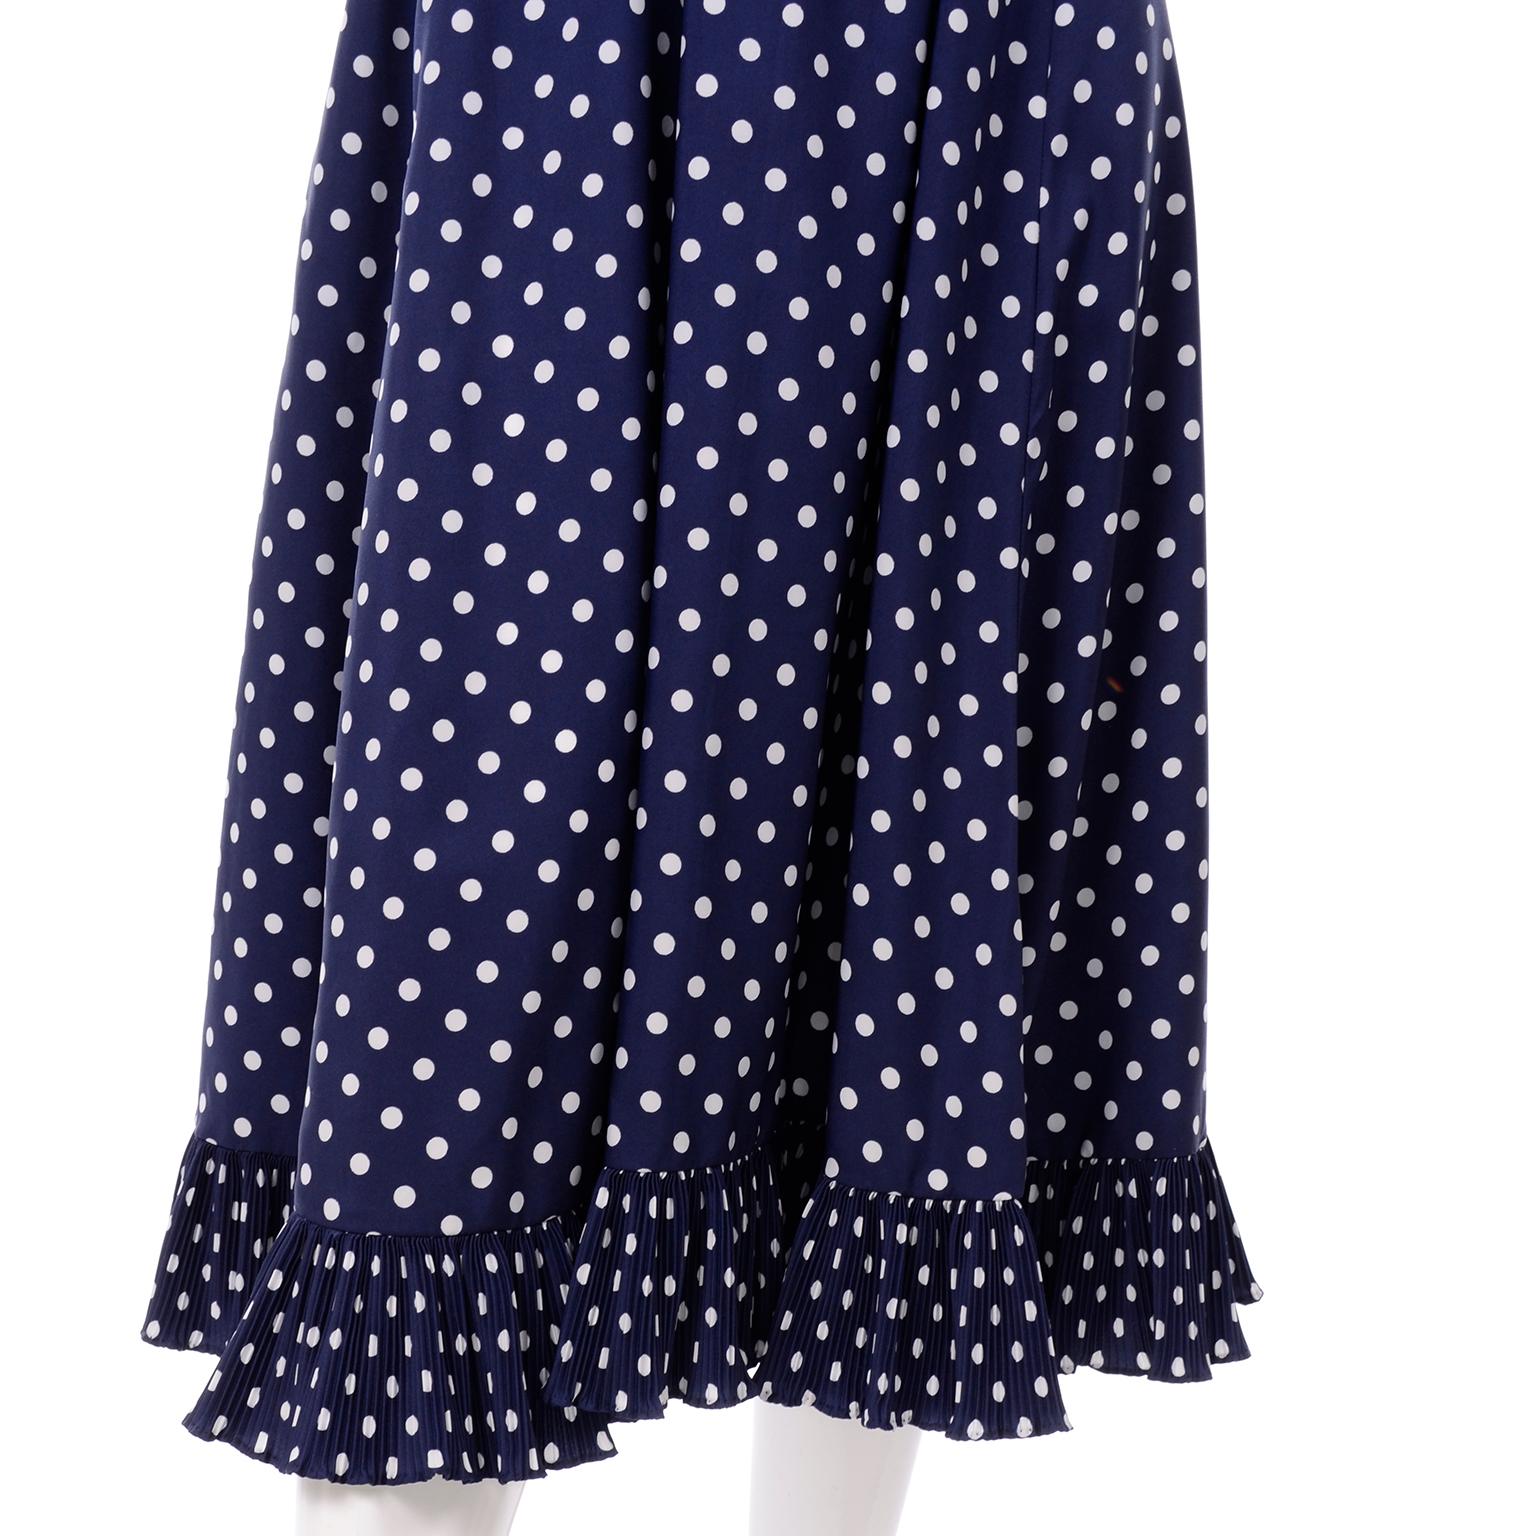 1970s Victor Costa Navy Blue & White Polka Dot Vintage Dress With Ruffles For Sale 2